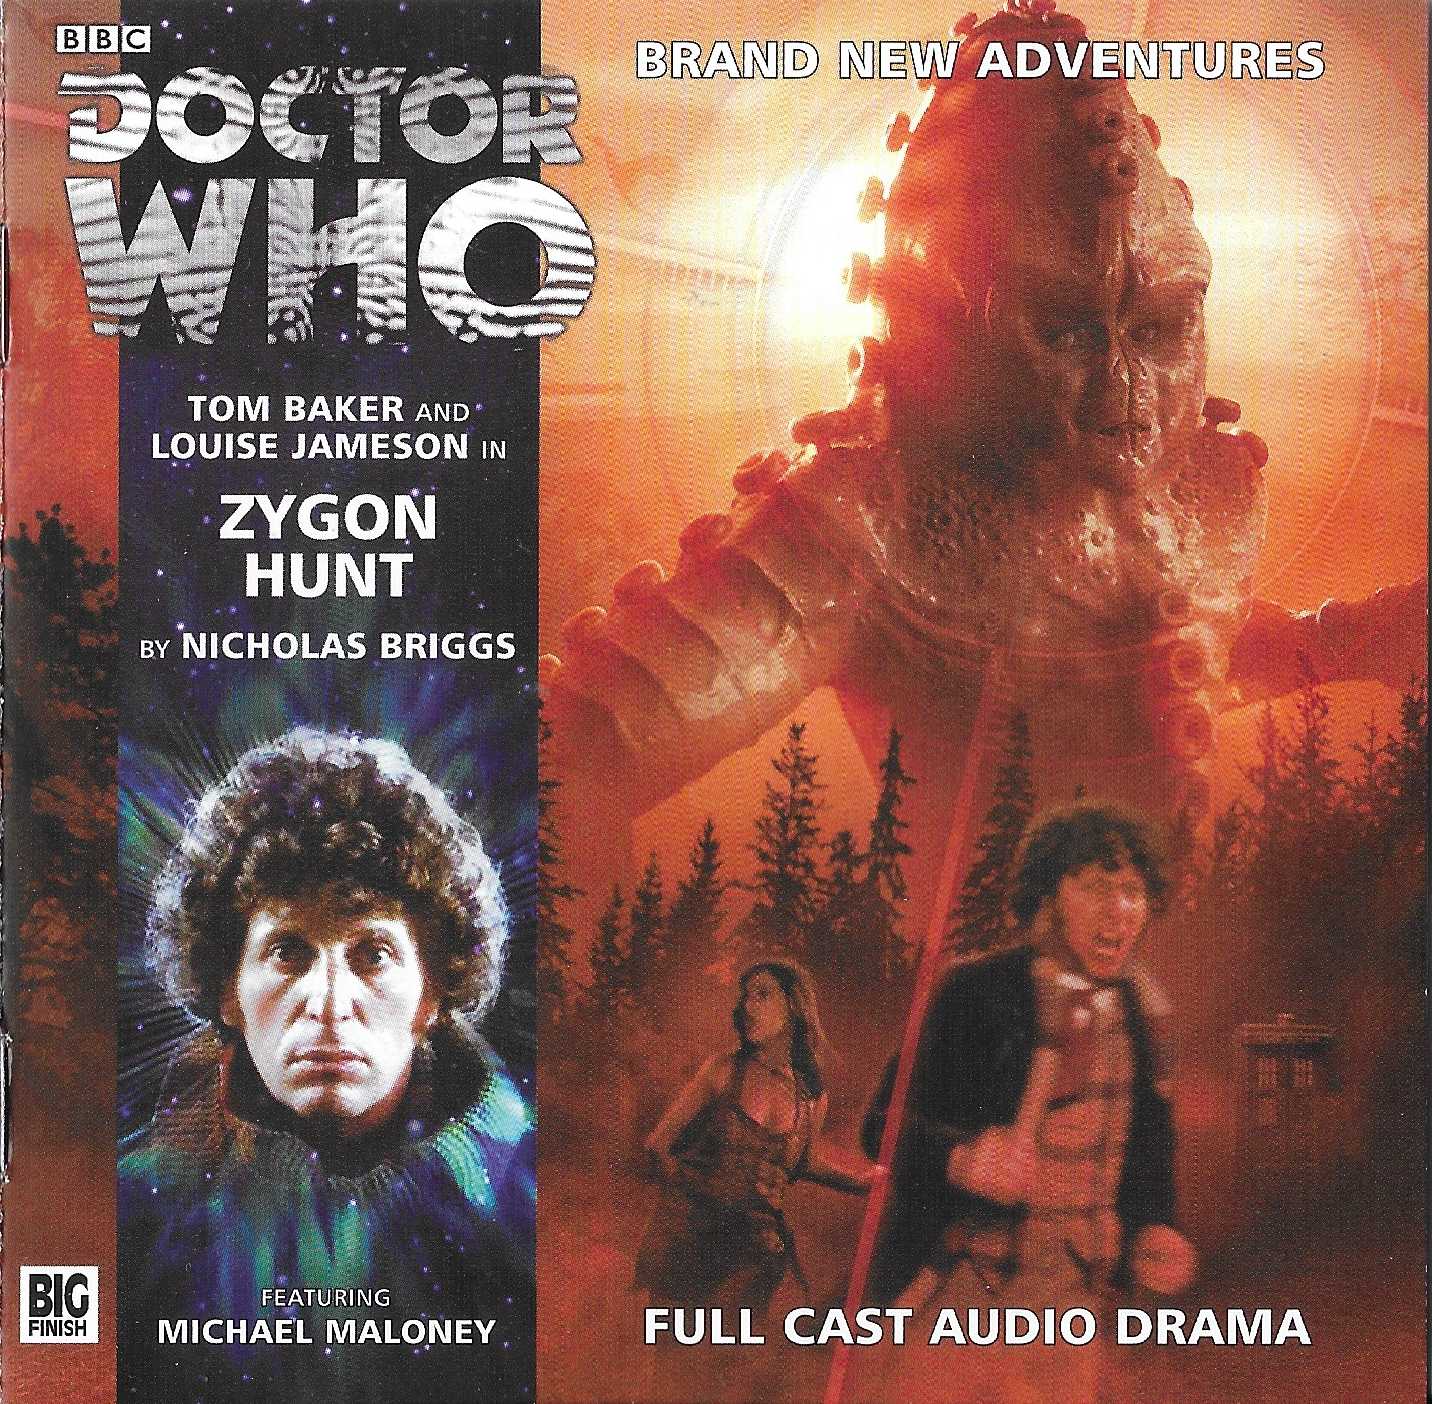 Picture of BFPTOMCD021 Doctor Who - Zygon hunt by artist Nicholas Briggs from the BBC records and Tapes library